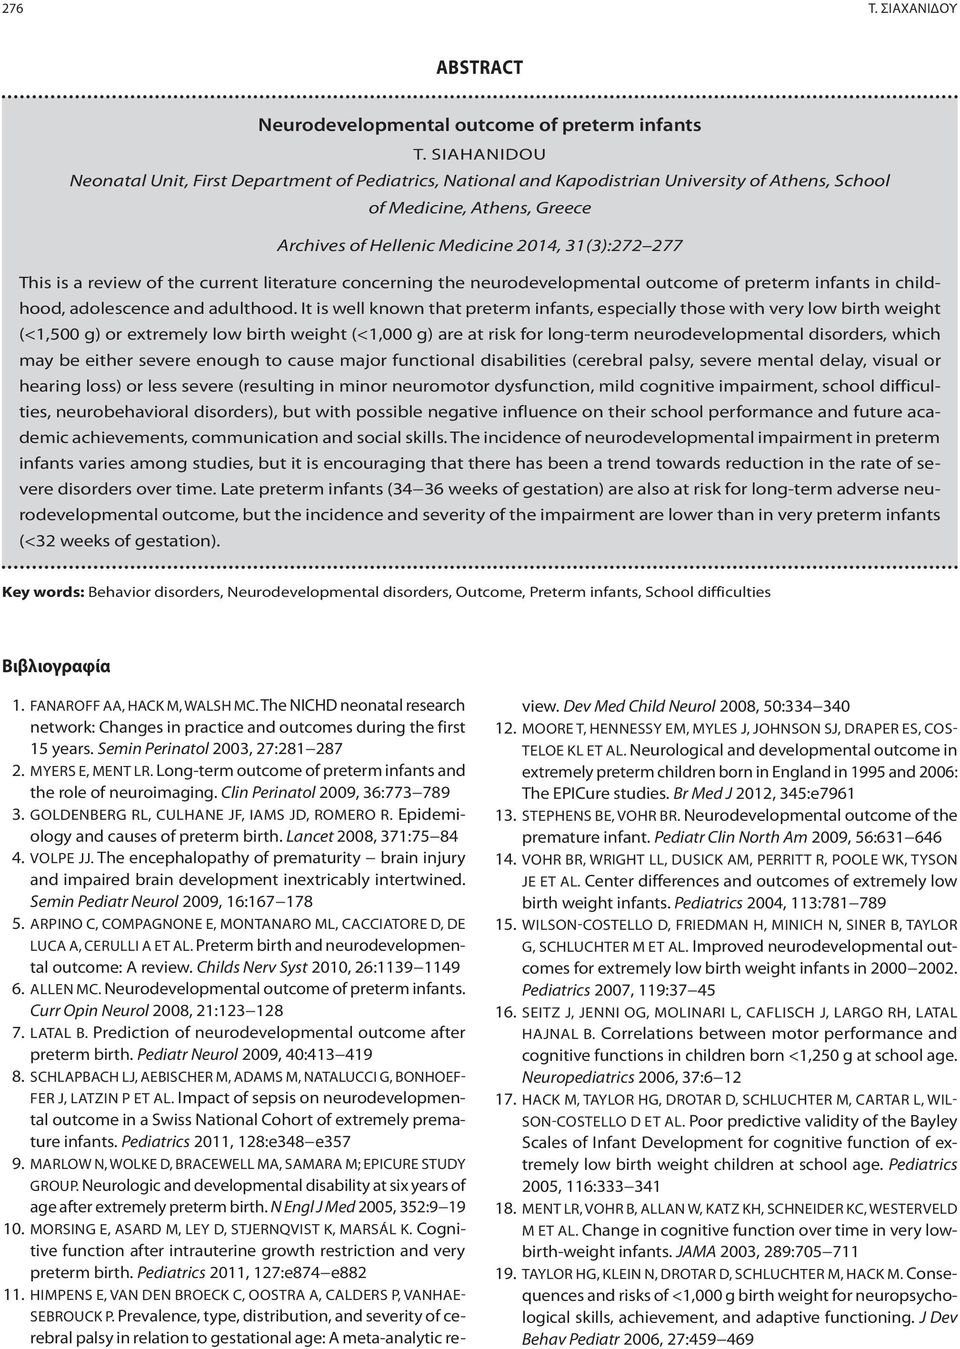 a review of the current literature concerning the neurodevelopmental outcome of preterm infants in childhood, adolescence and adulthood.